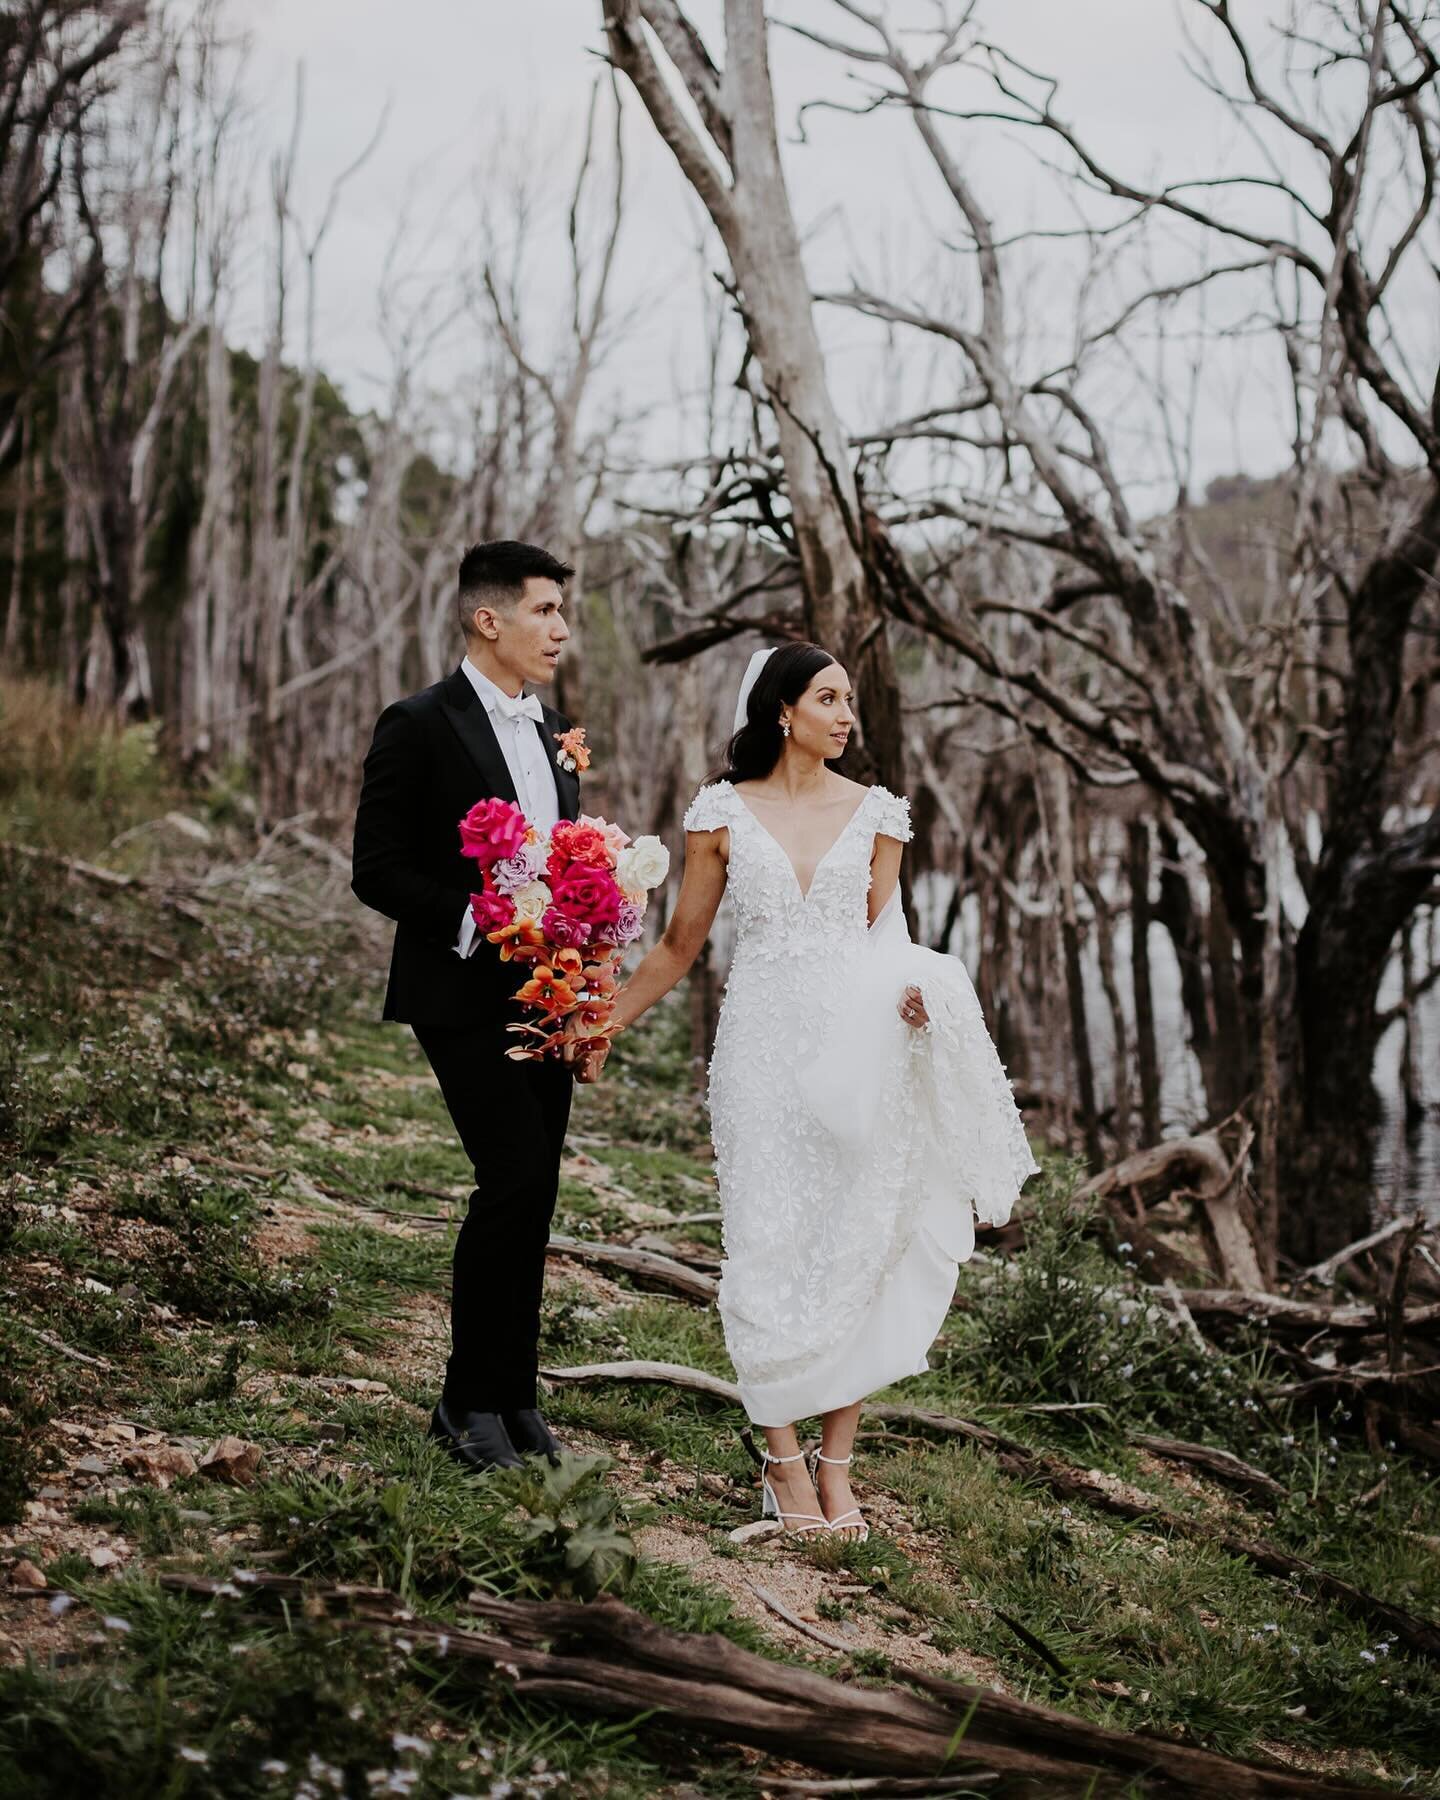 ~ Rob &amp; Ally ~ 
Love me some dead trees &amp; moody light. 
Stunning wedding @theacreboomerangfarm with these two. 

Florist @emunahevents_ 
Hair and makeup @blushdbrides 
Dress @madewithlovebridal 
suit @institchu 
Celebrant @laurenmareecelebran